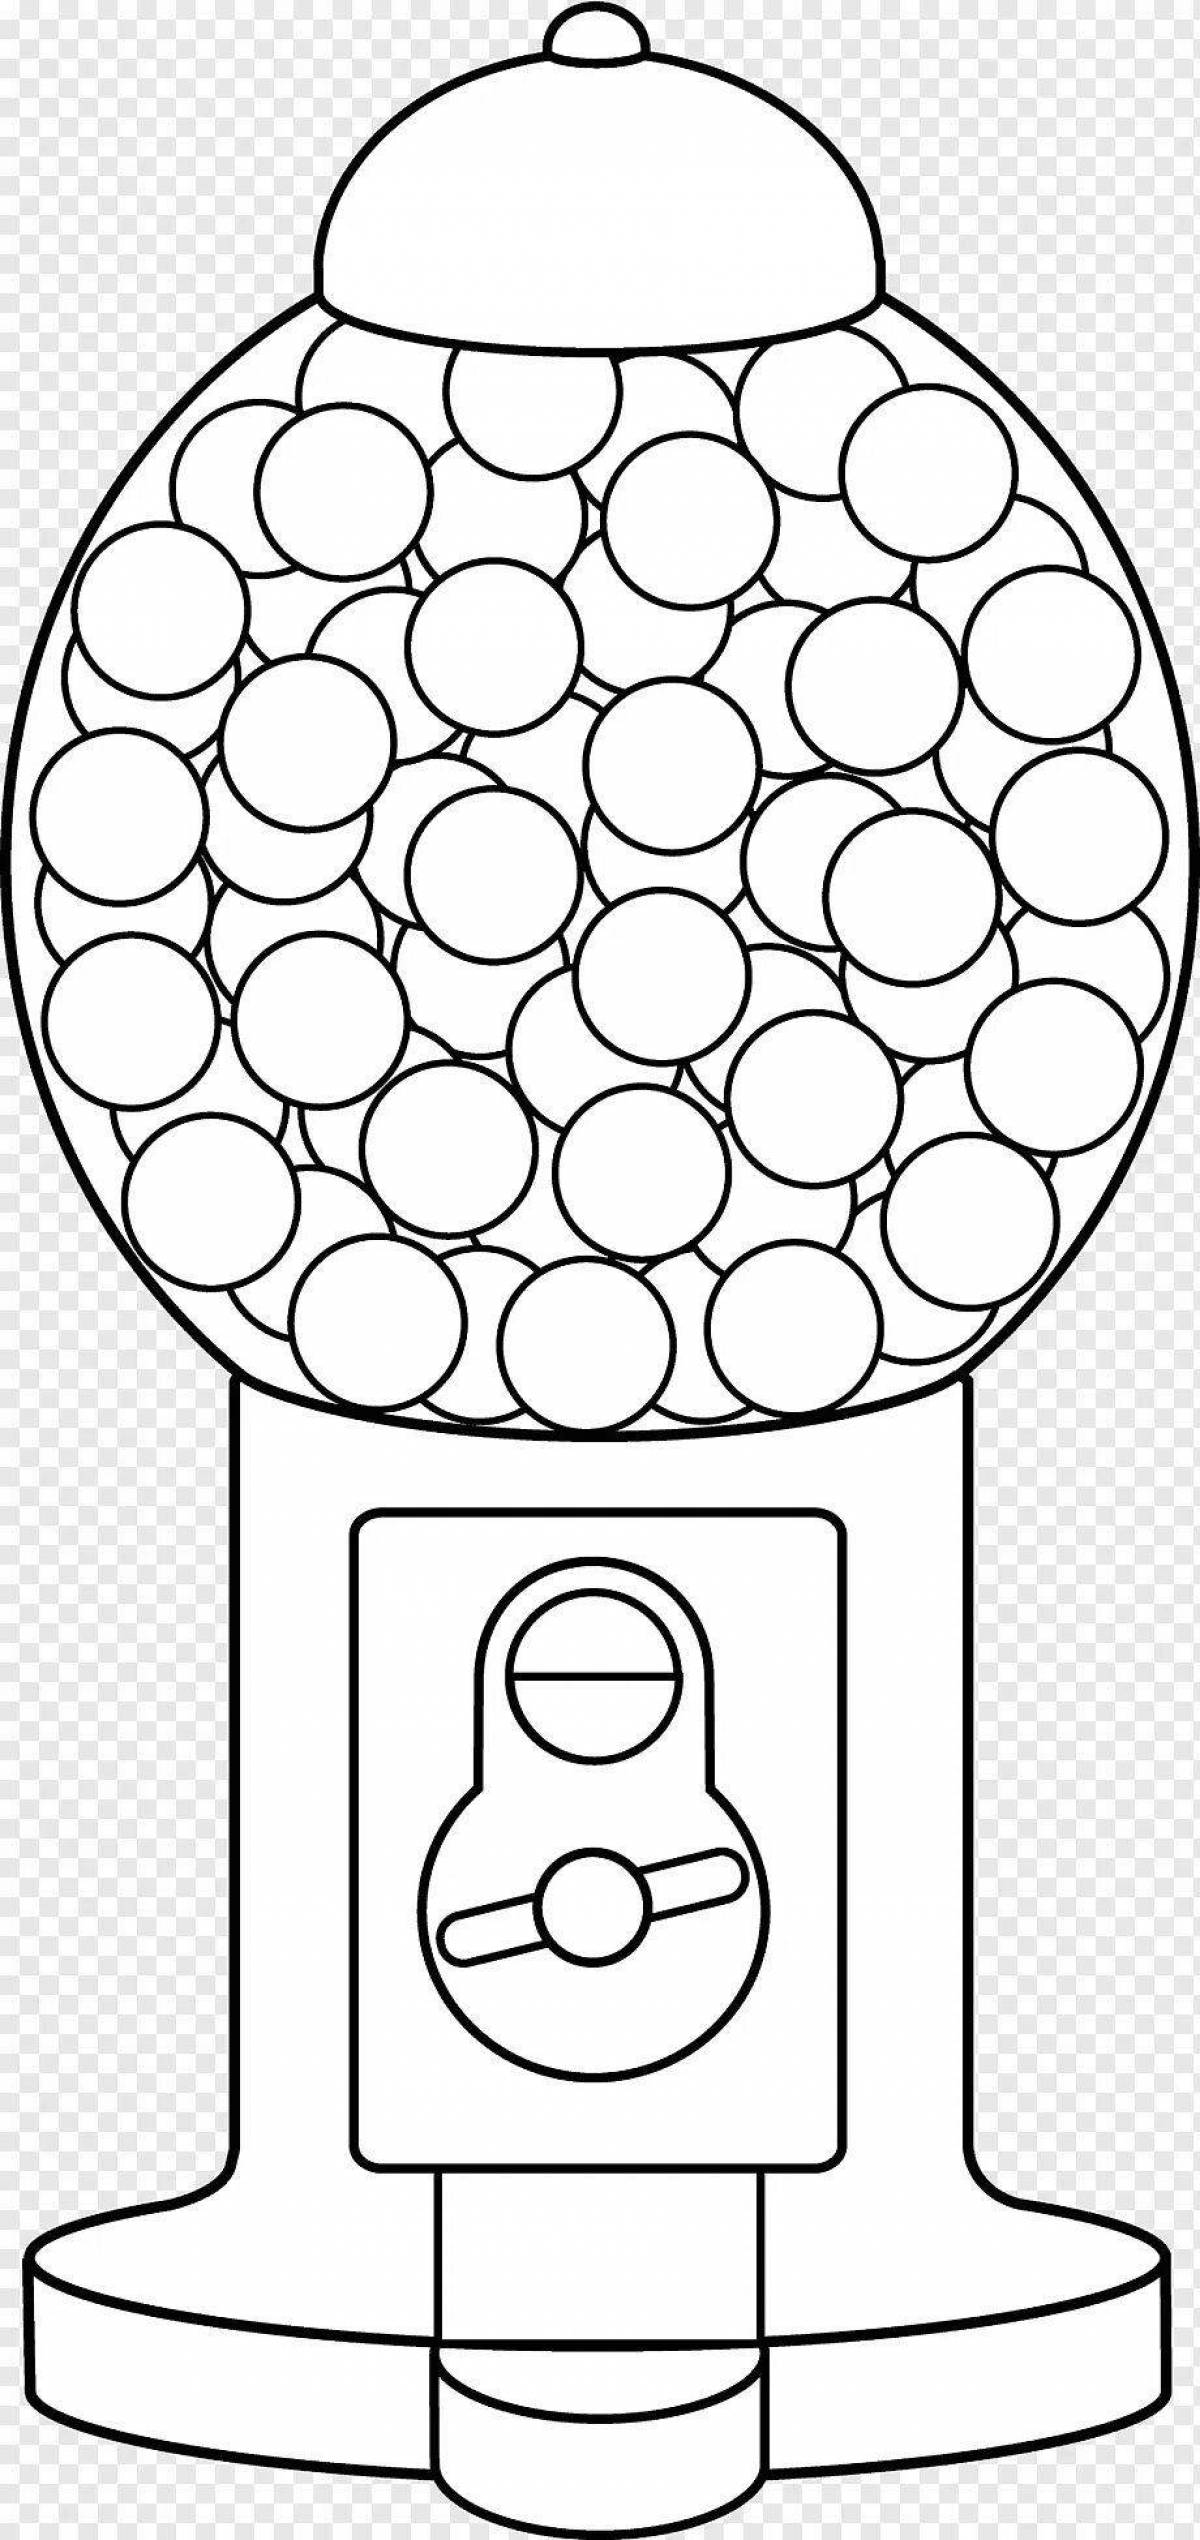 Charming game bubble kvass coloring page